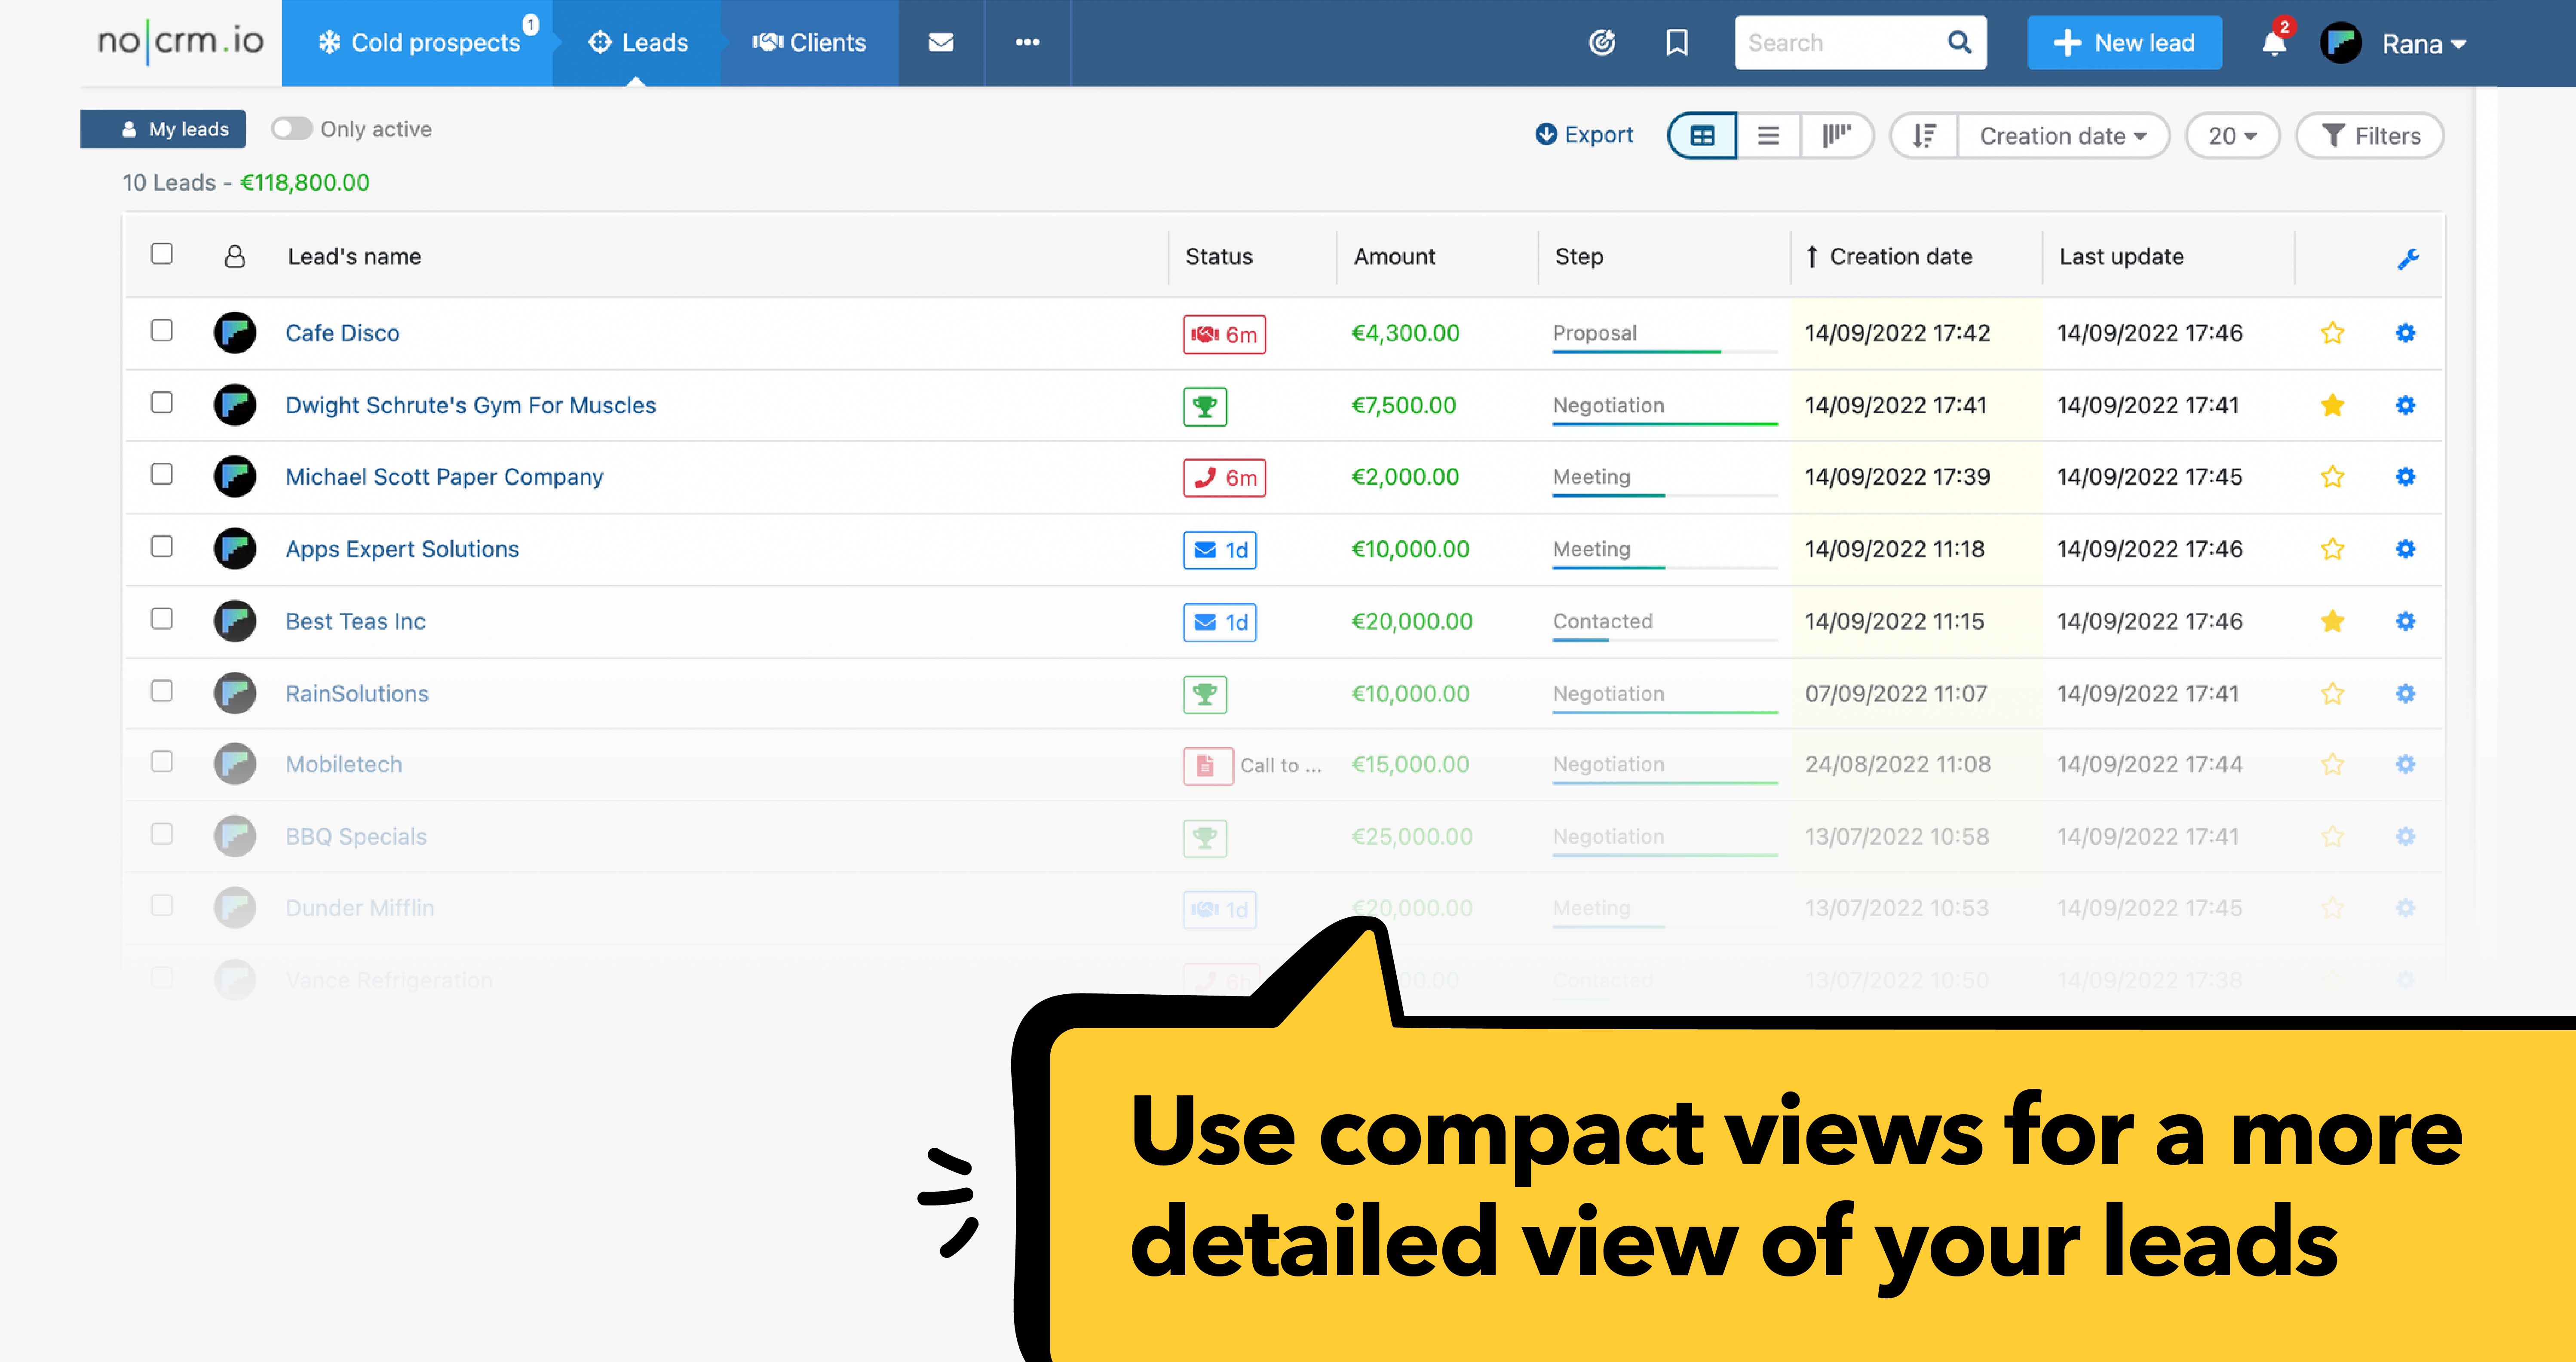 Quickly view your leads' details and next actions to perform